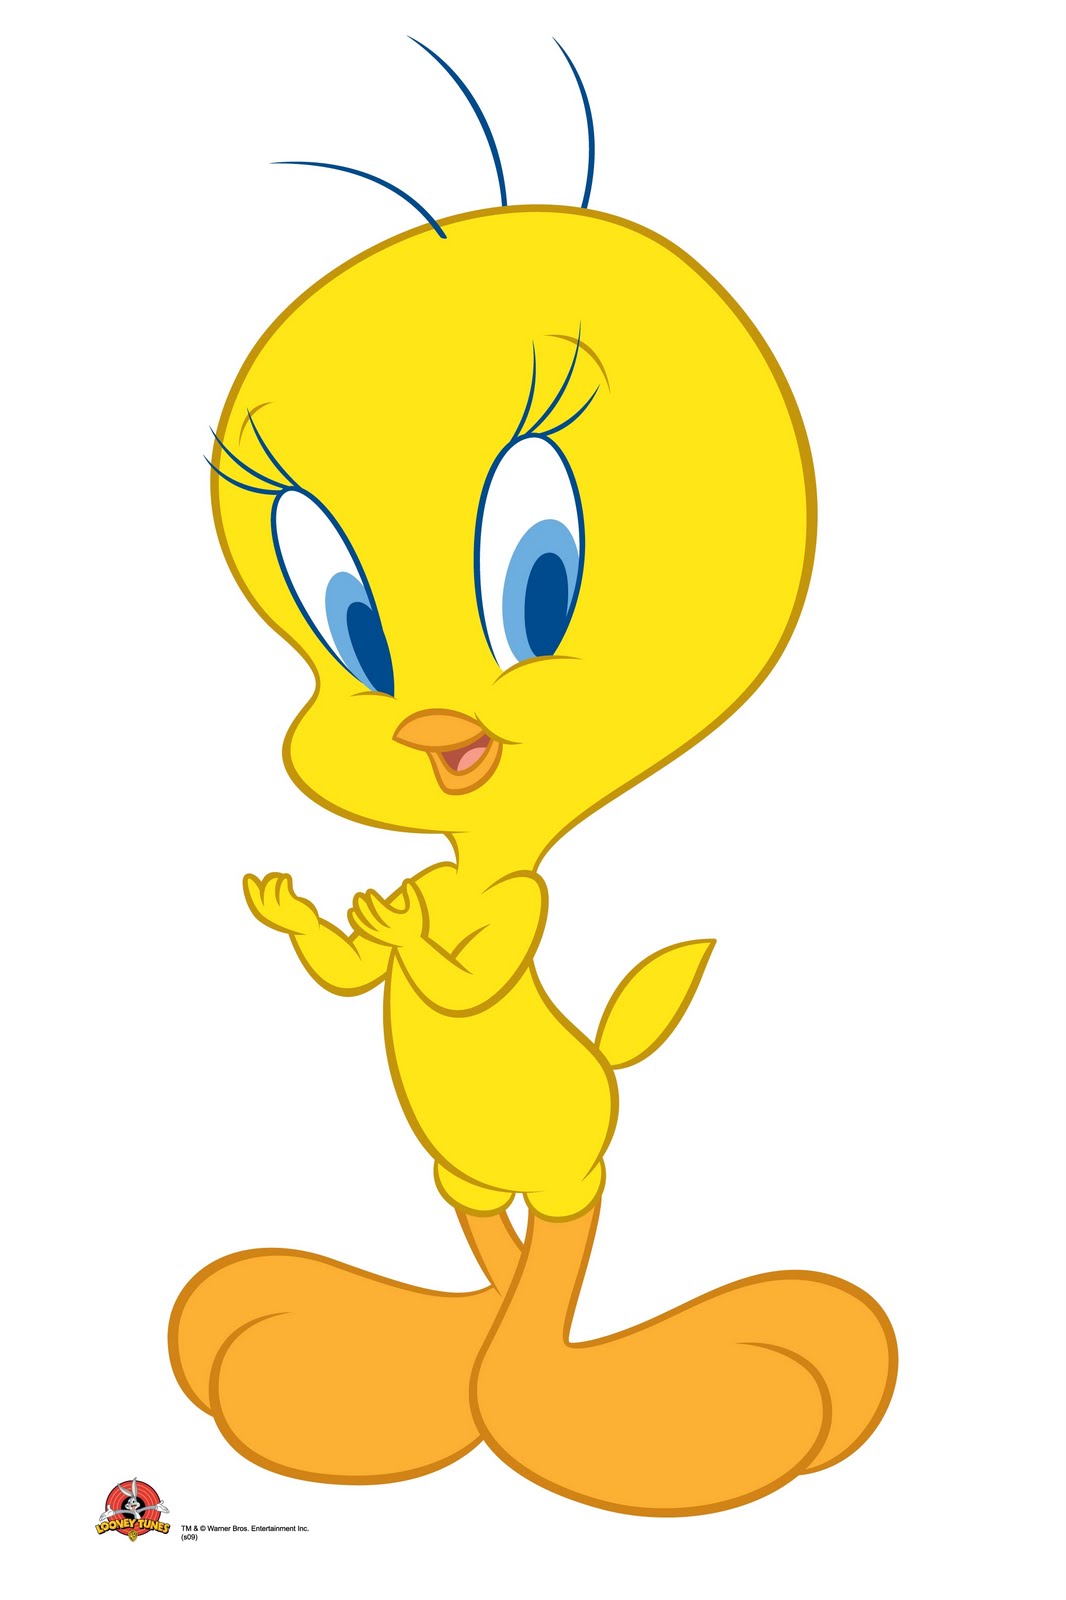 Clip Arts Related To : tweety bird clipart. view all Tweety). 